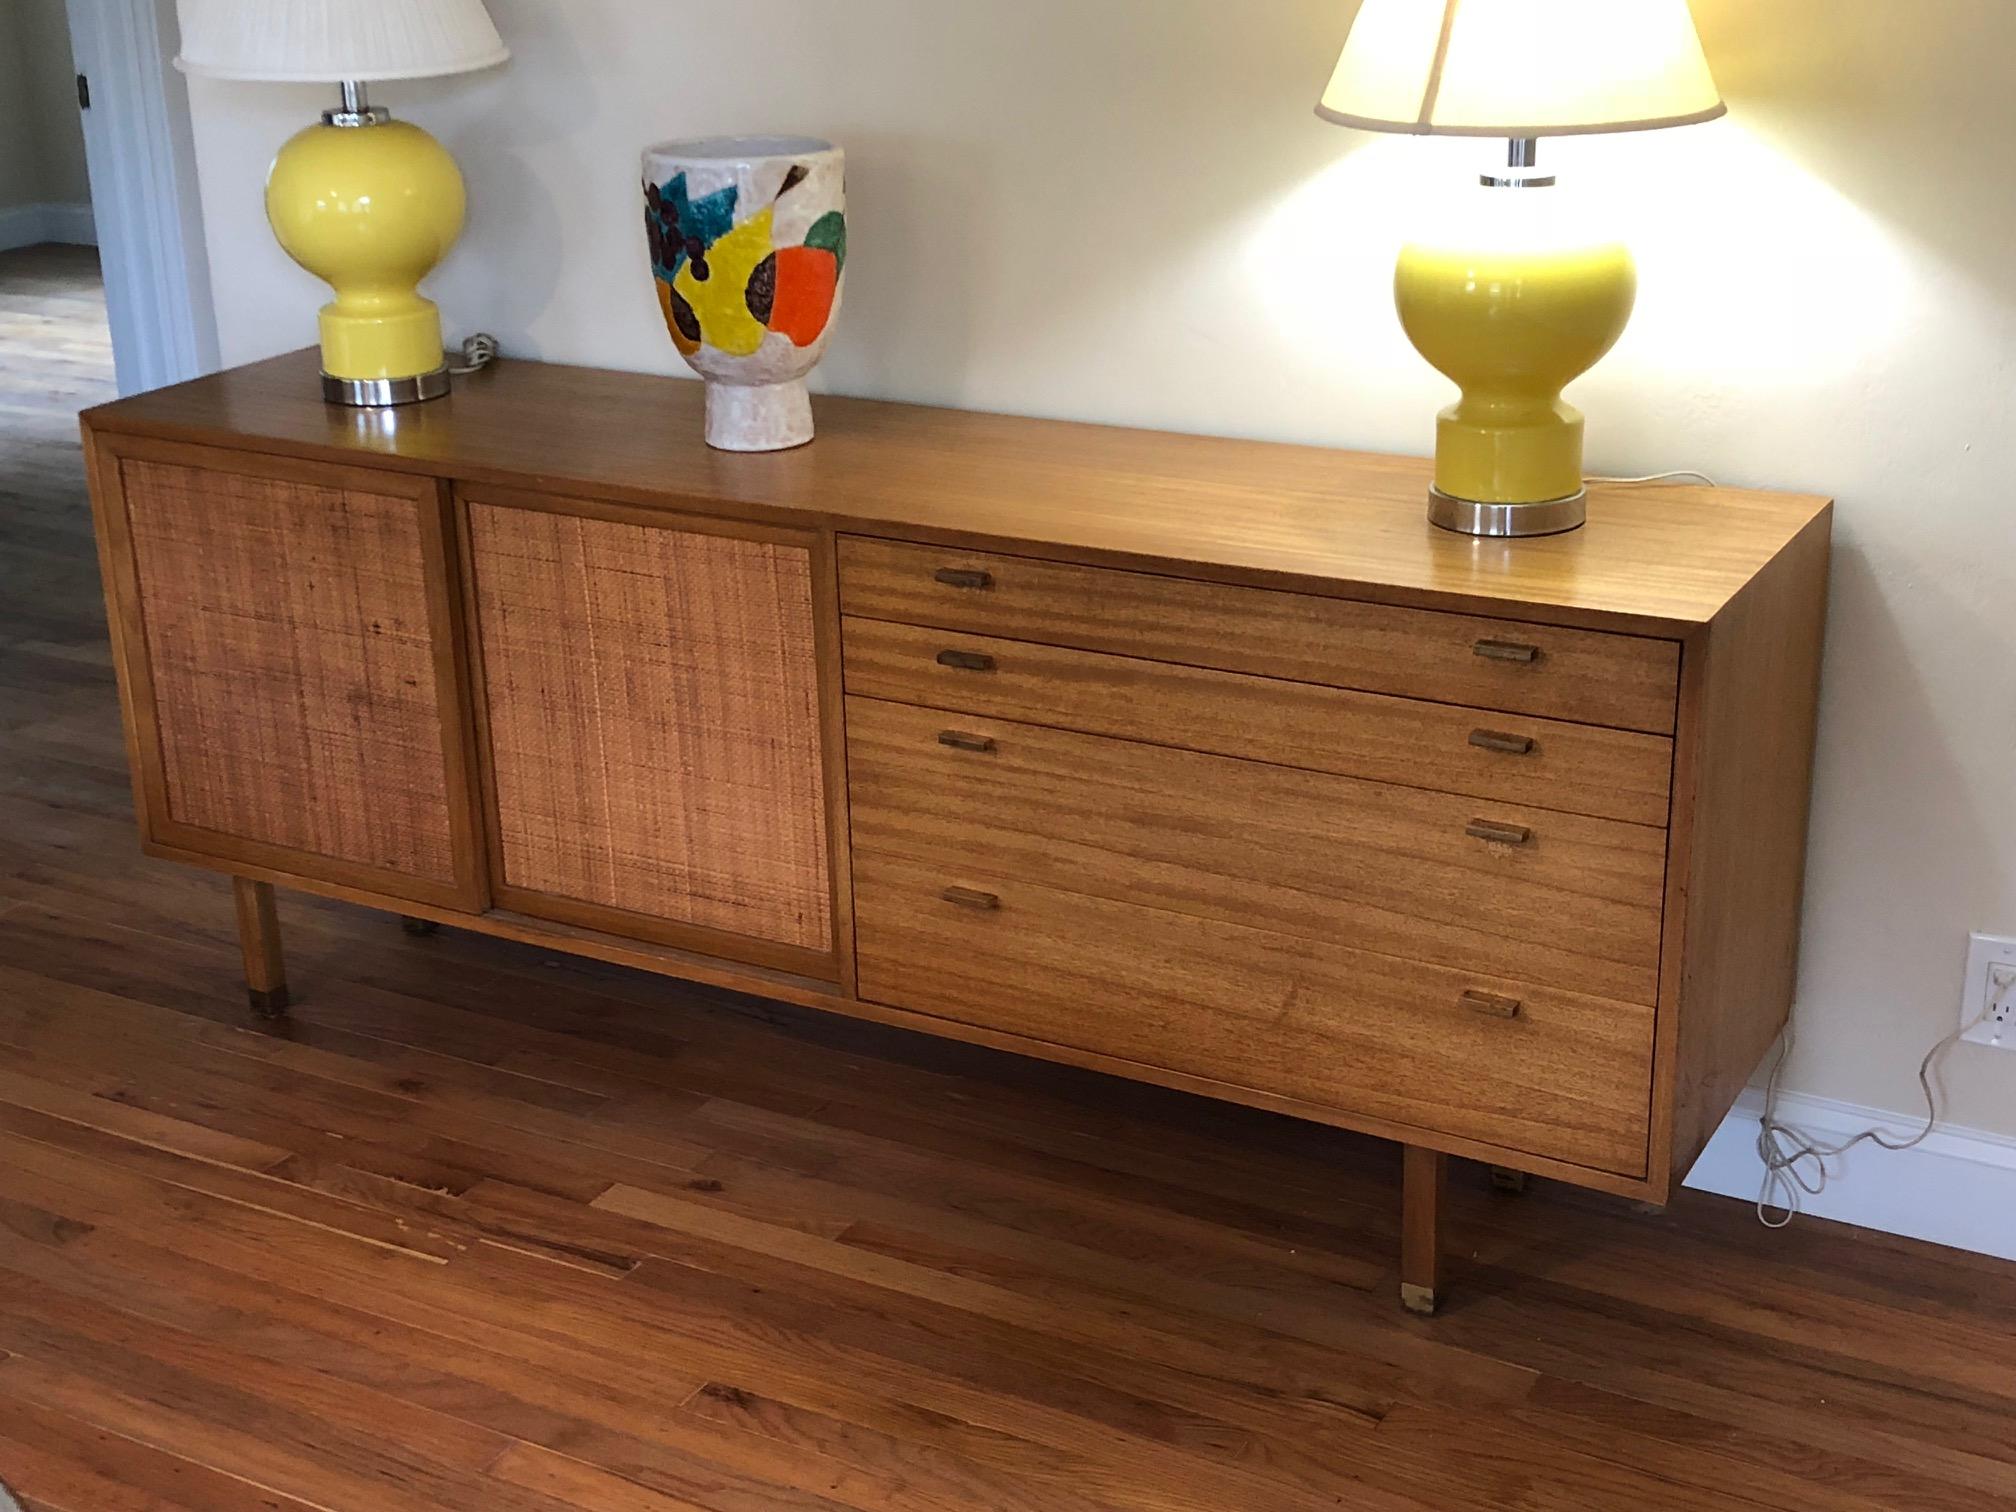 A Classic Harvey Probber mahogany credenza with caned panels and drawers. Brass sabots and cork lined drawers are just some of the details that distinguish this unusual piece.